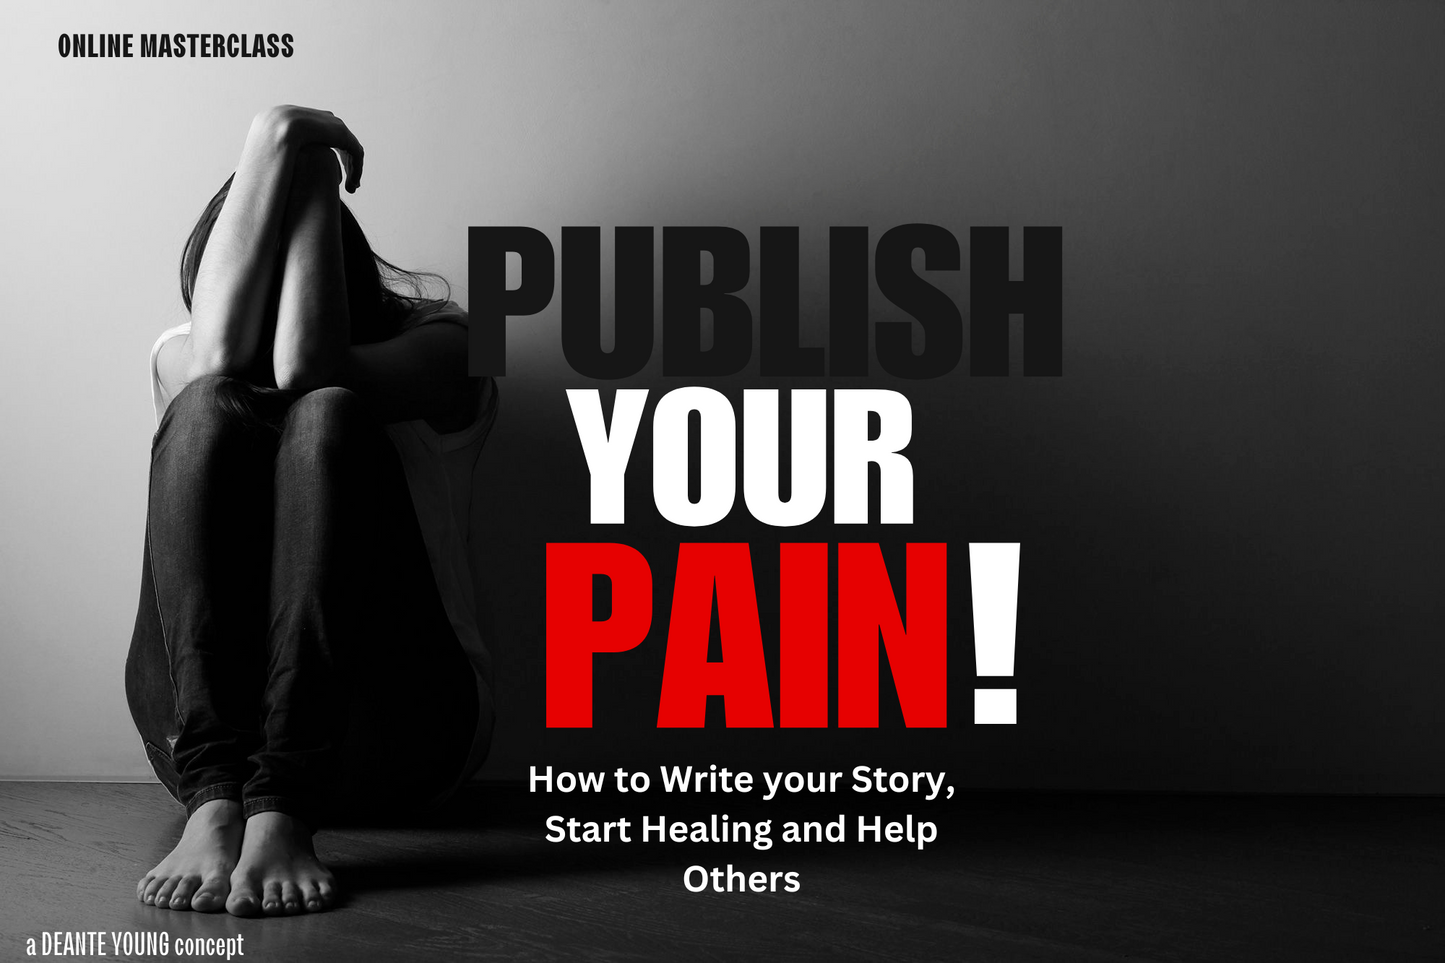 Publish Your Pain! How to Write your Story, Start Healing and Help Others